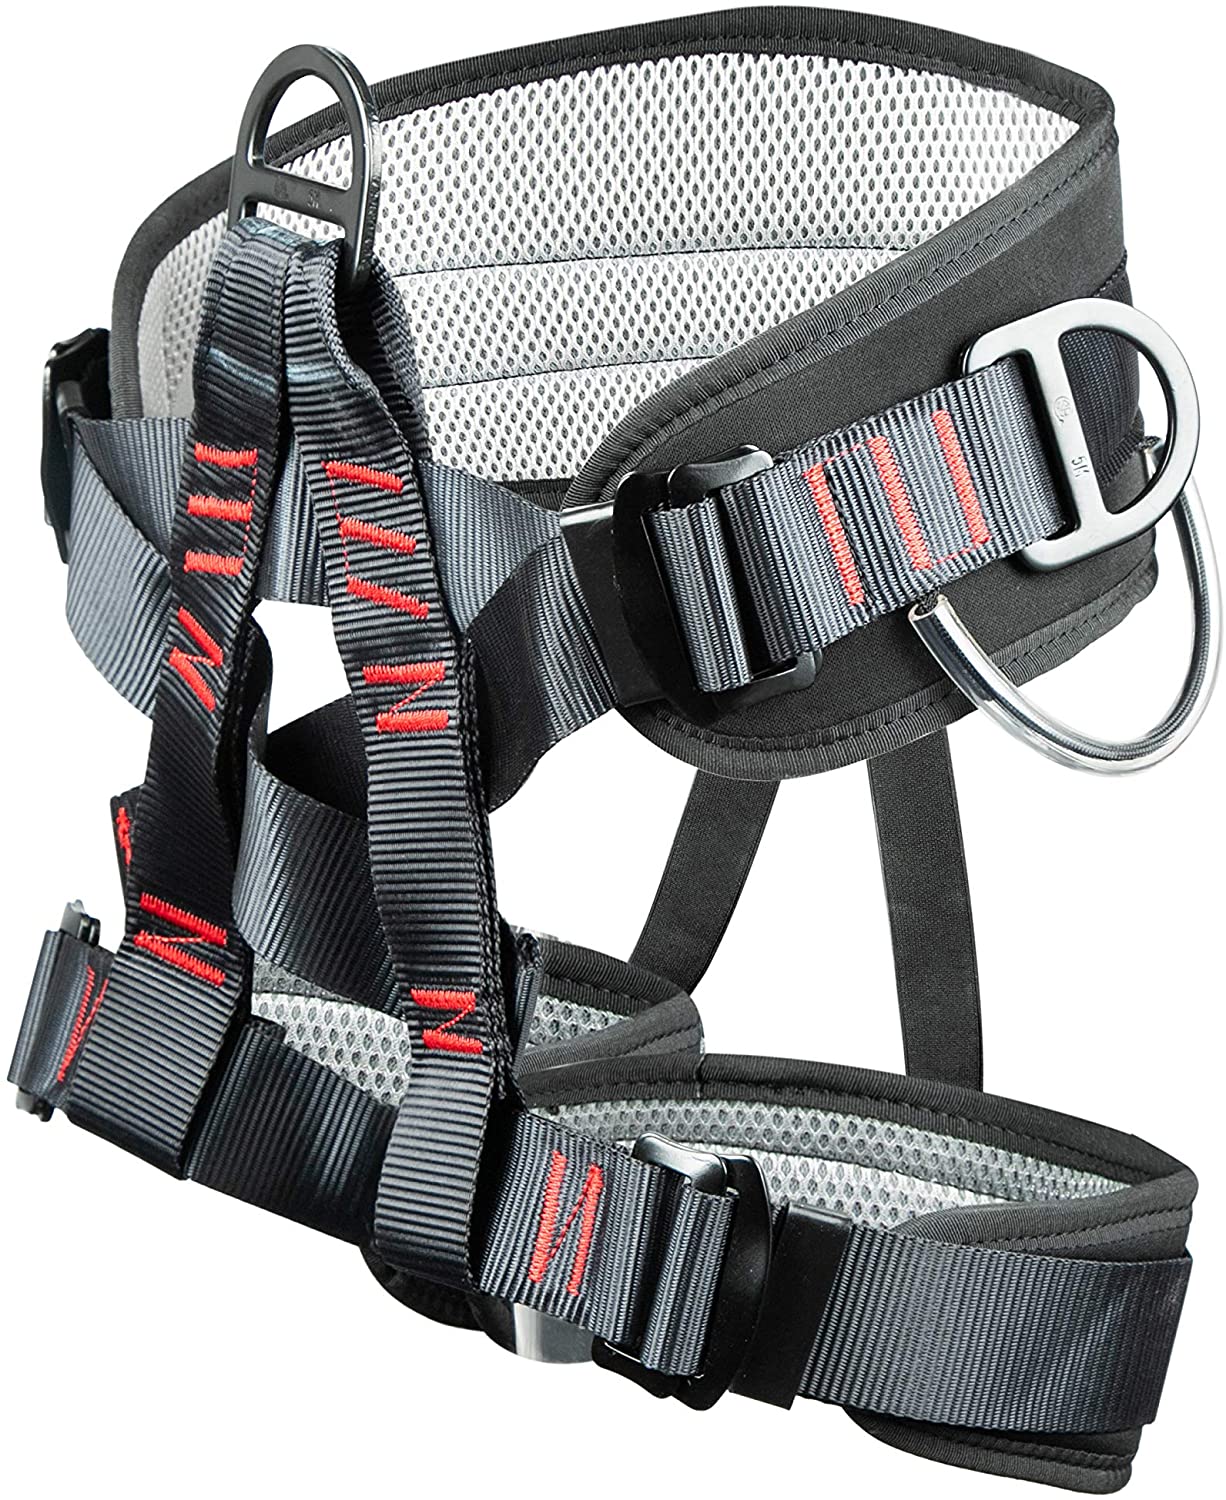 Best Climbing Harness for Beginners 5 Top Picks for More Adventure